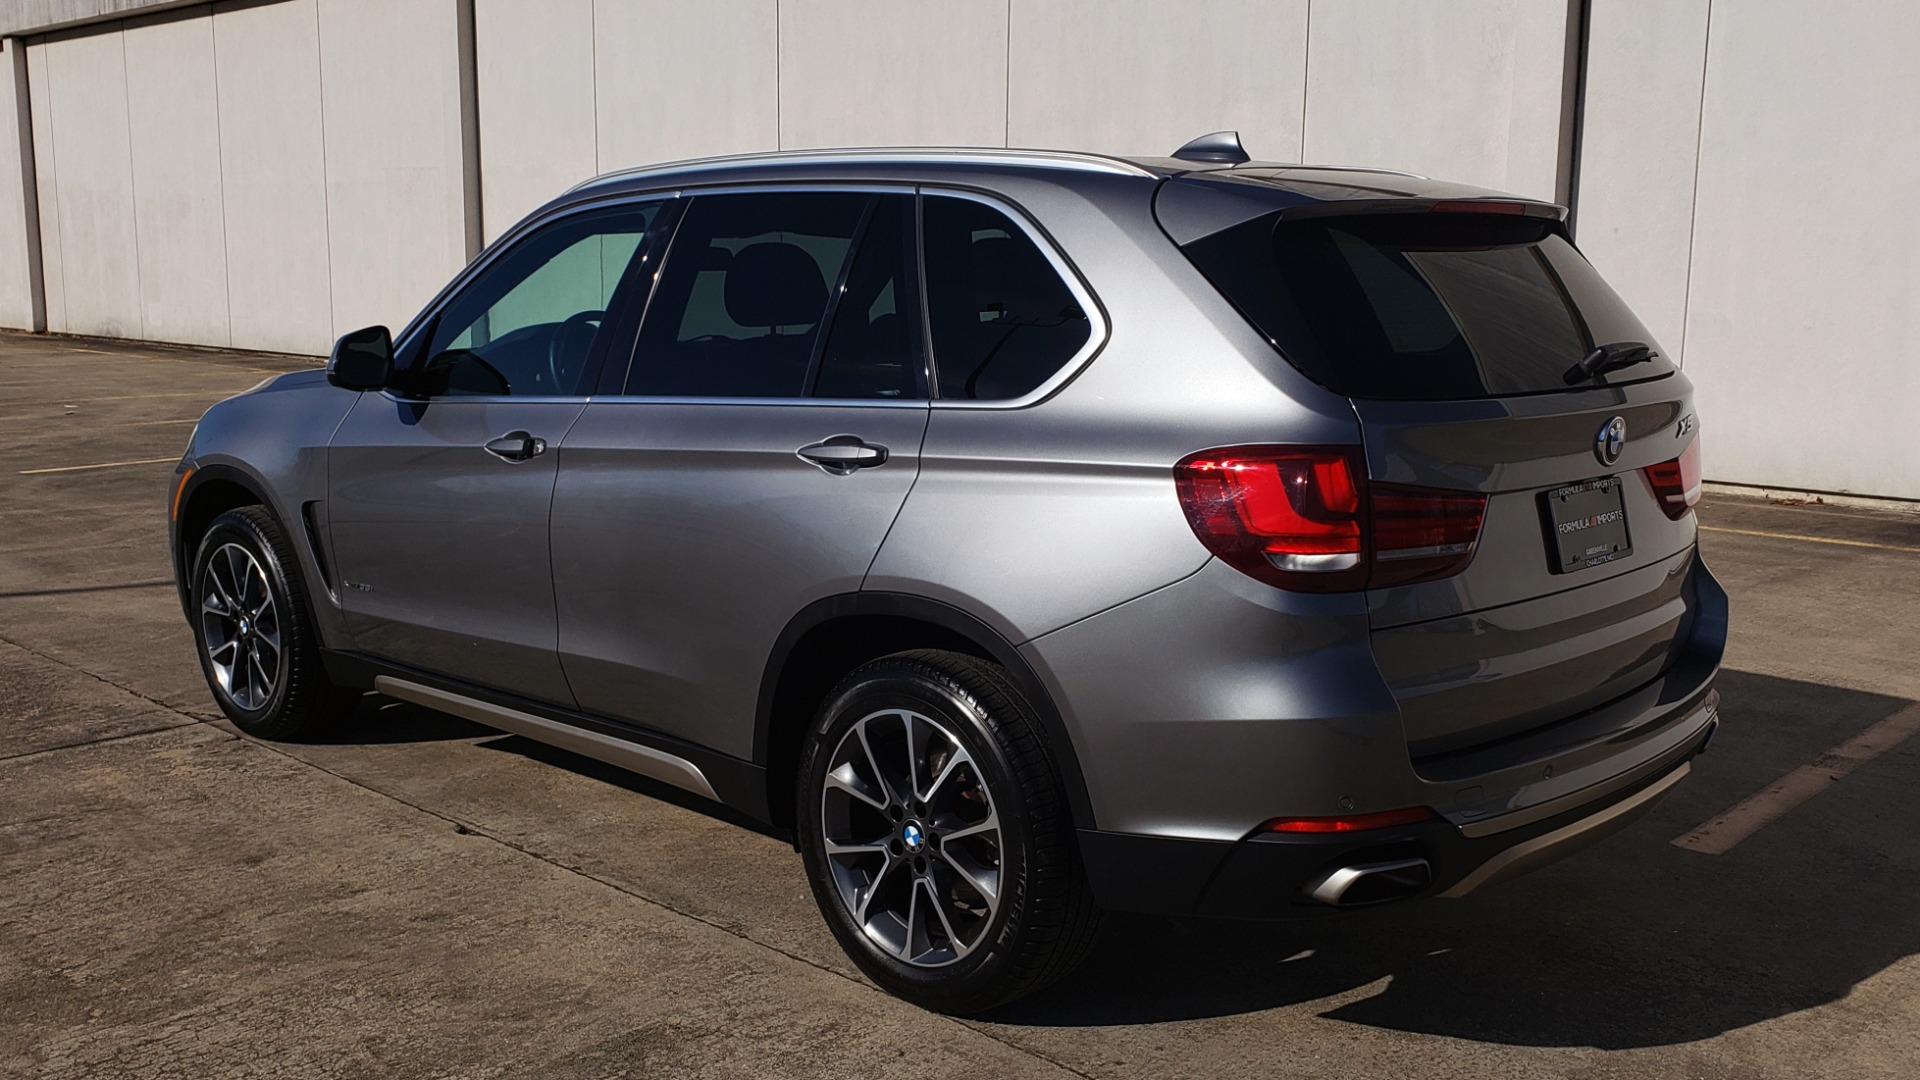 Used 2018 BMW X5 XDRIVE35I PREMIUM 3.0L SUV / DRVR ASST / NAV / HUD / SUNROOF / REARVIEW for sale $45,399 at Formula Imports in Charlotte NC 28227 3